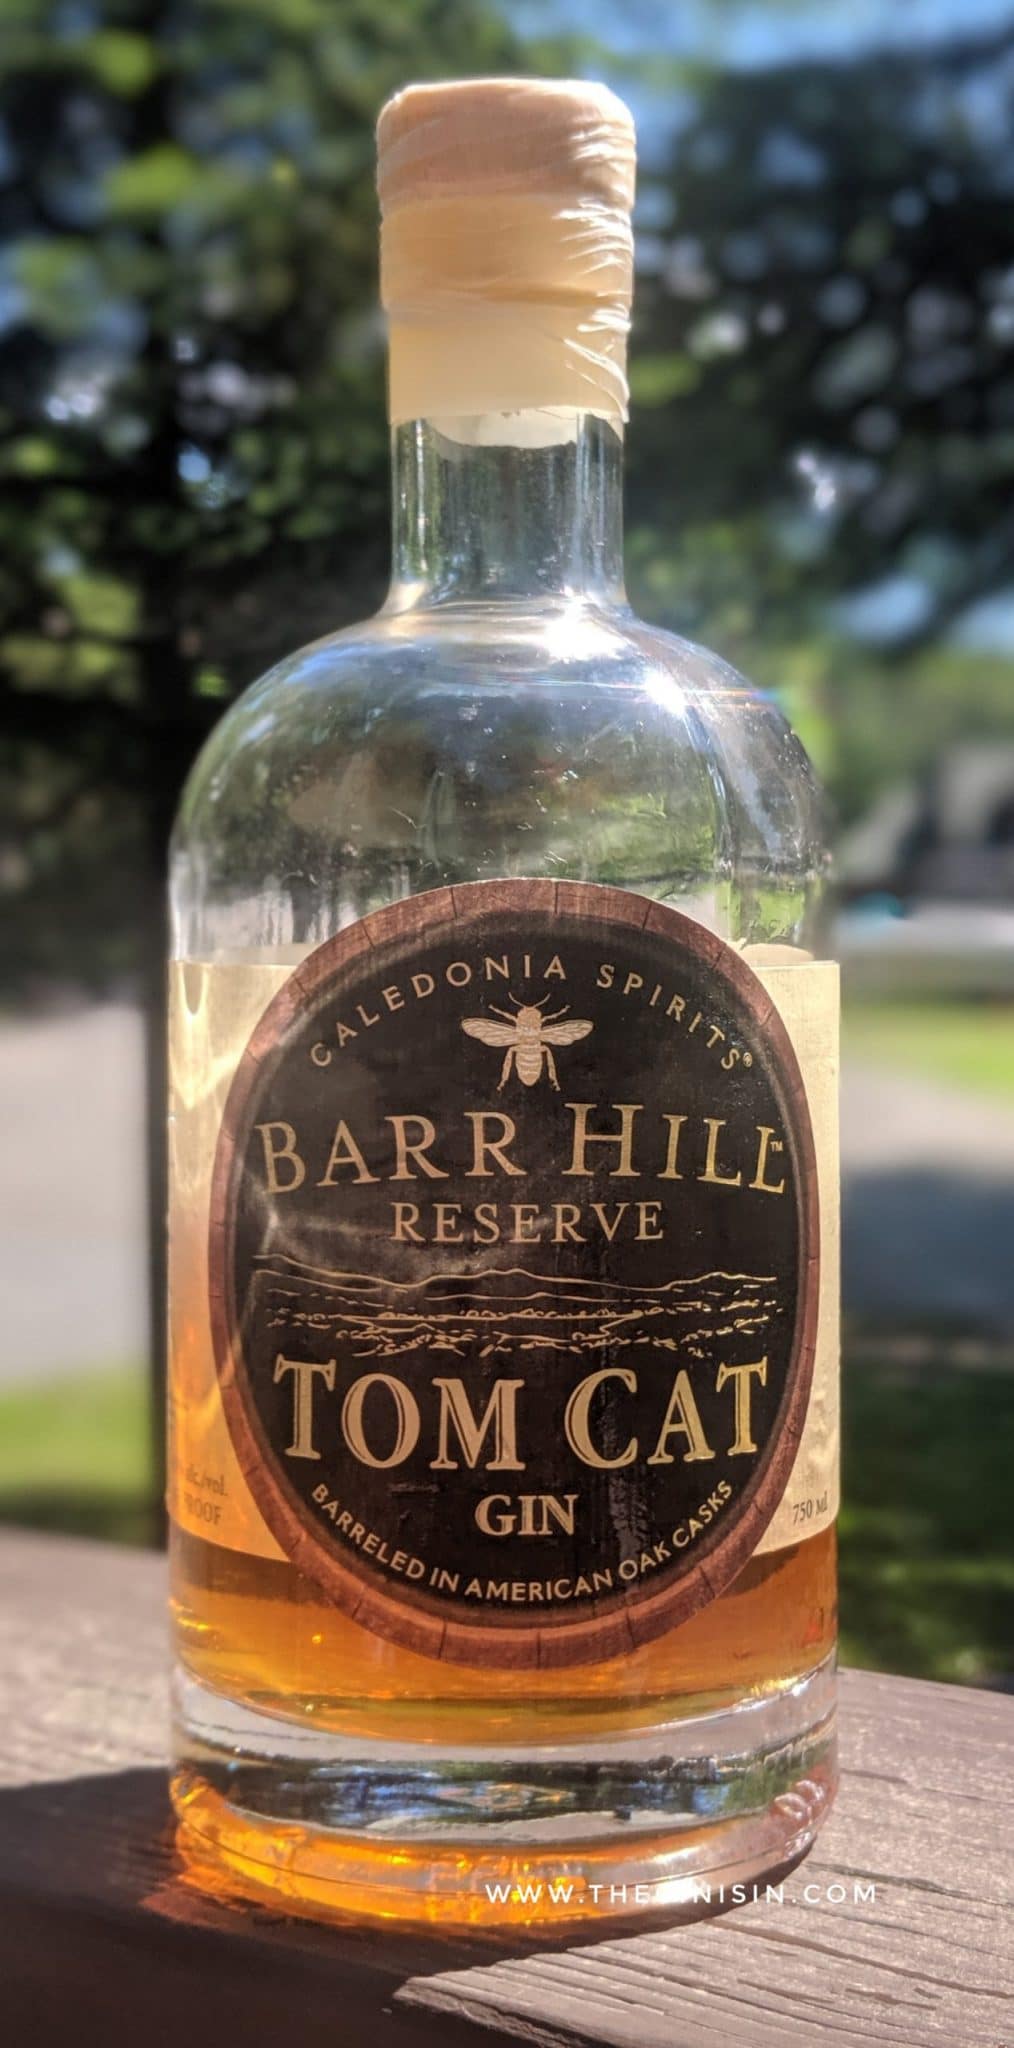 Tom Cat Gin (Batch 2), New Barrel aged gin with honey Review and Rating